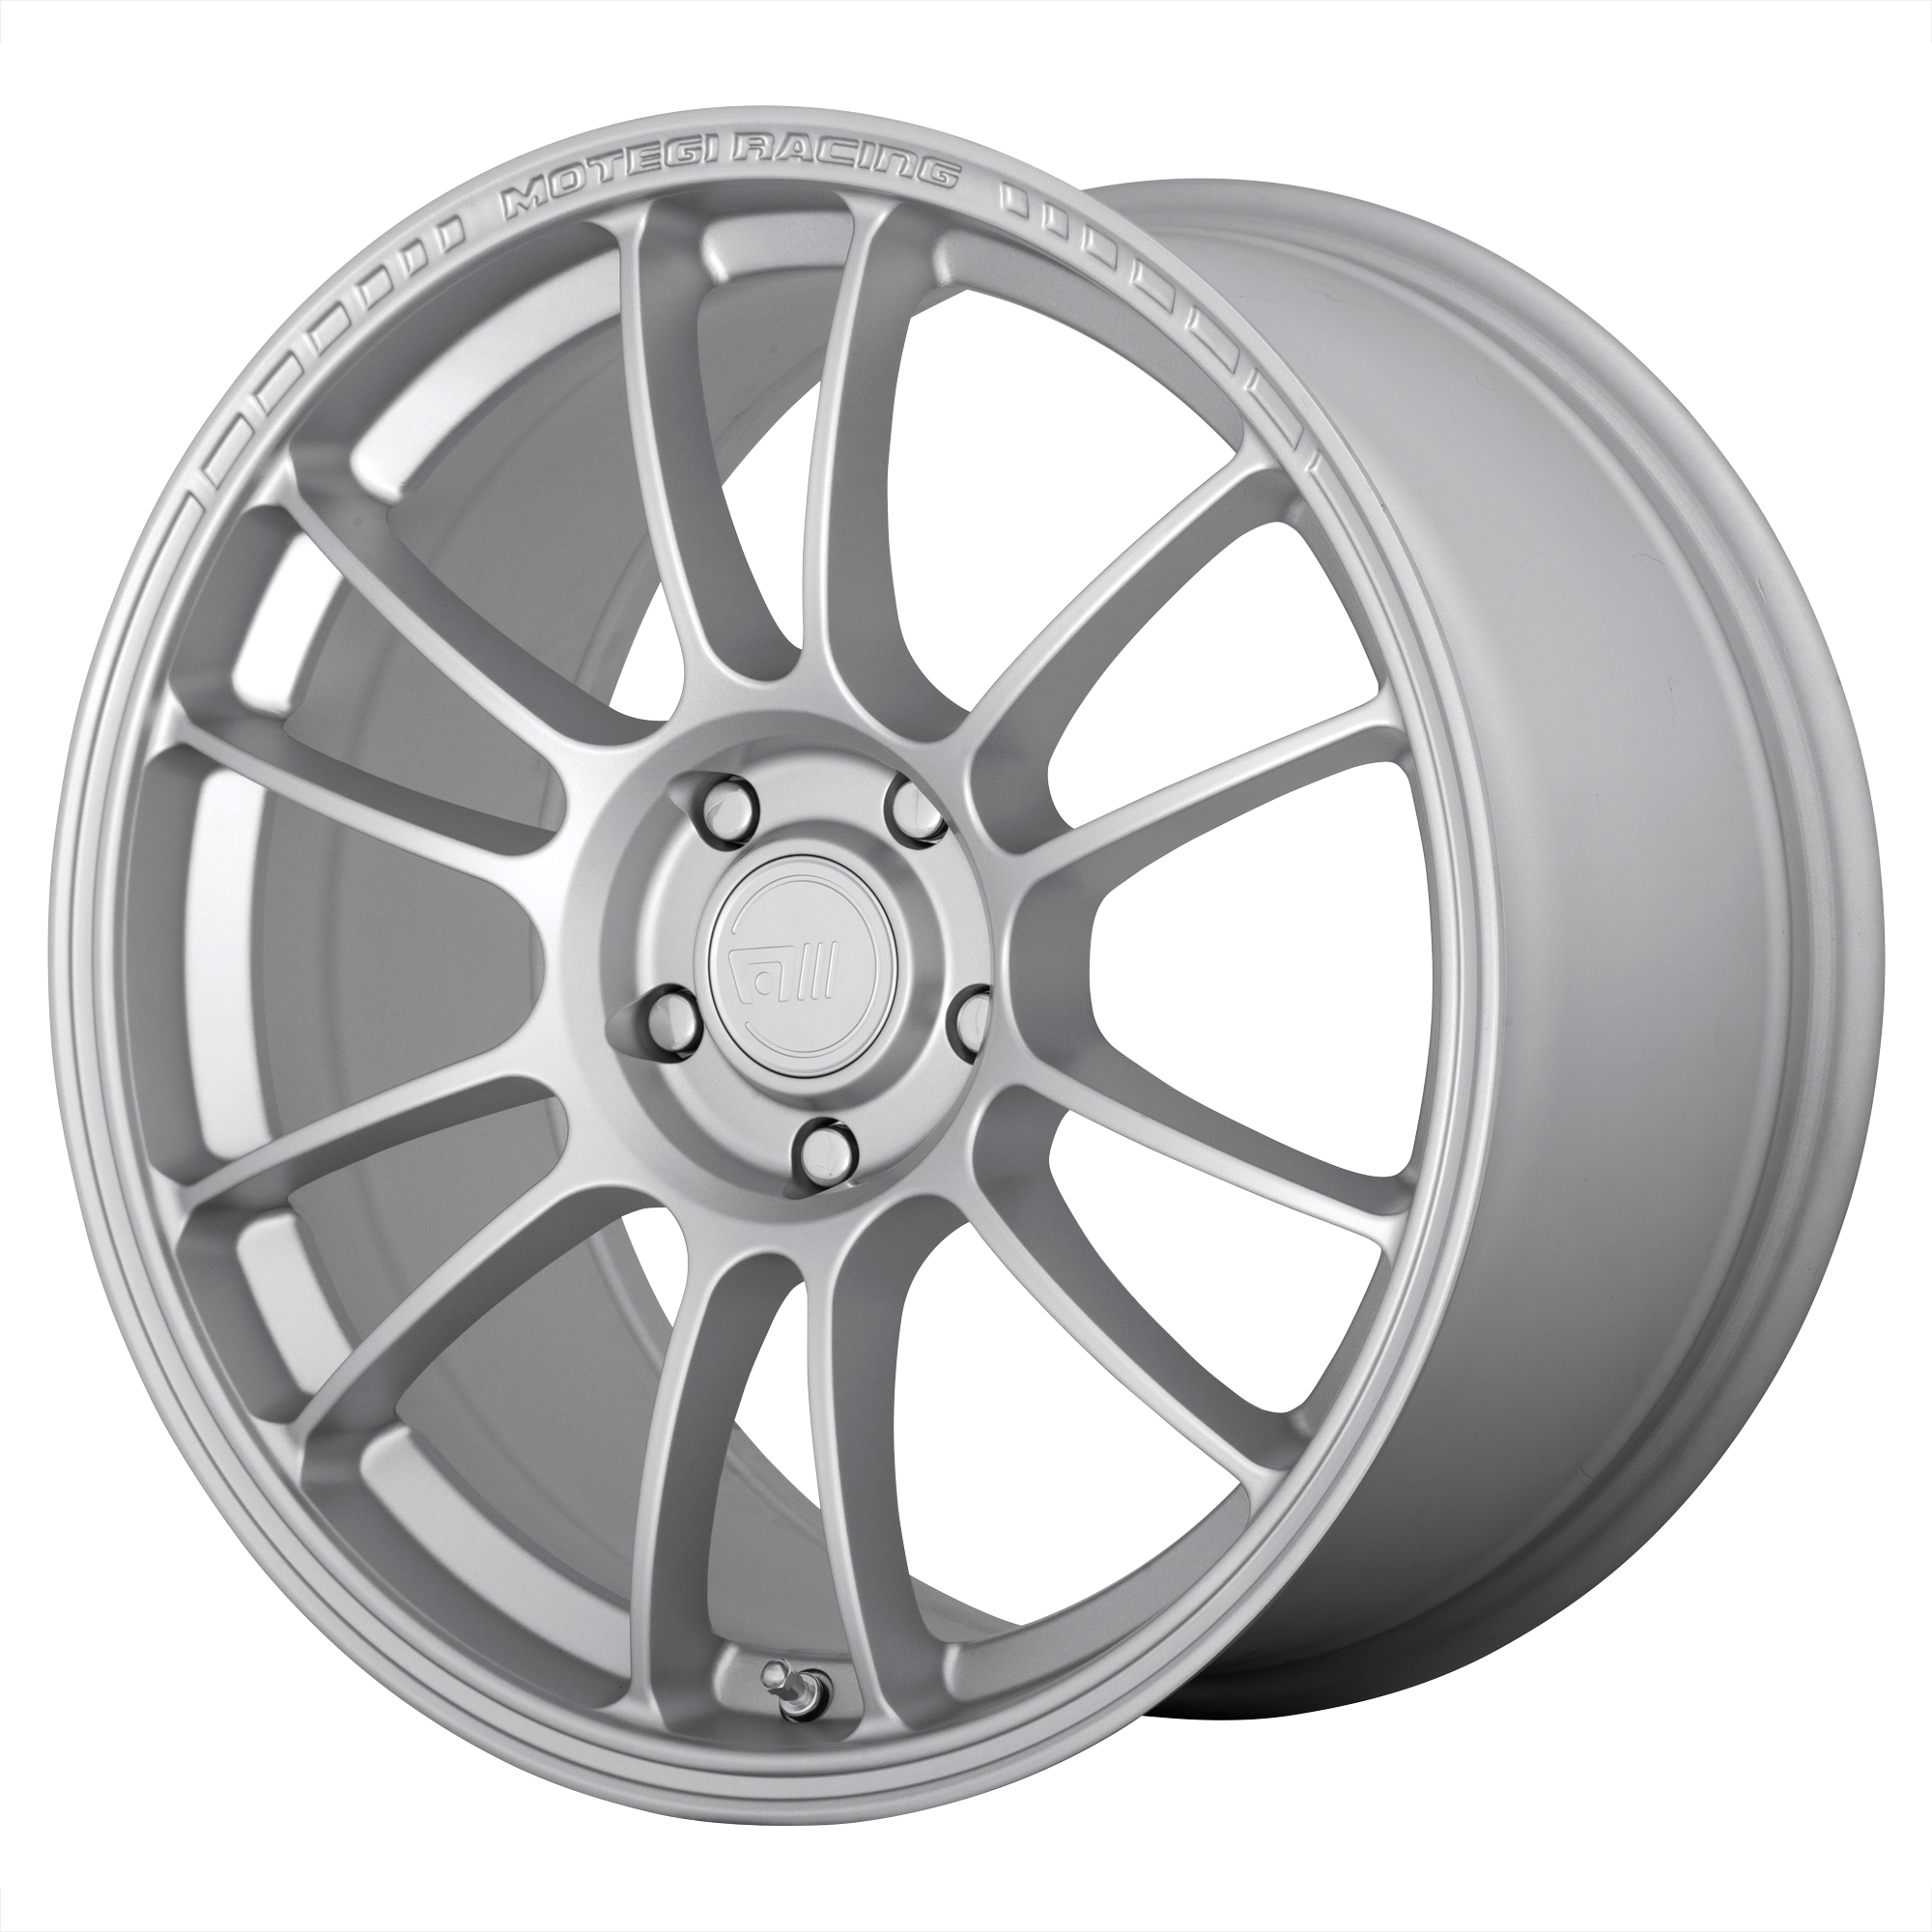 SS6 17x7 5x120.00 HYPER SILVER (42 mm) - Tires and Engine Performance